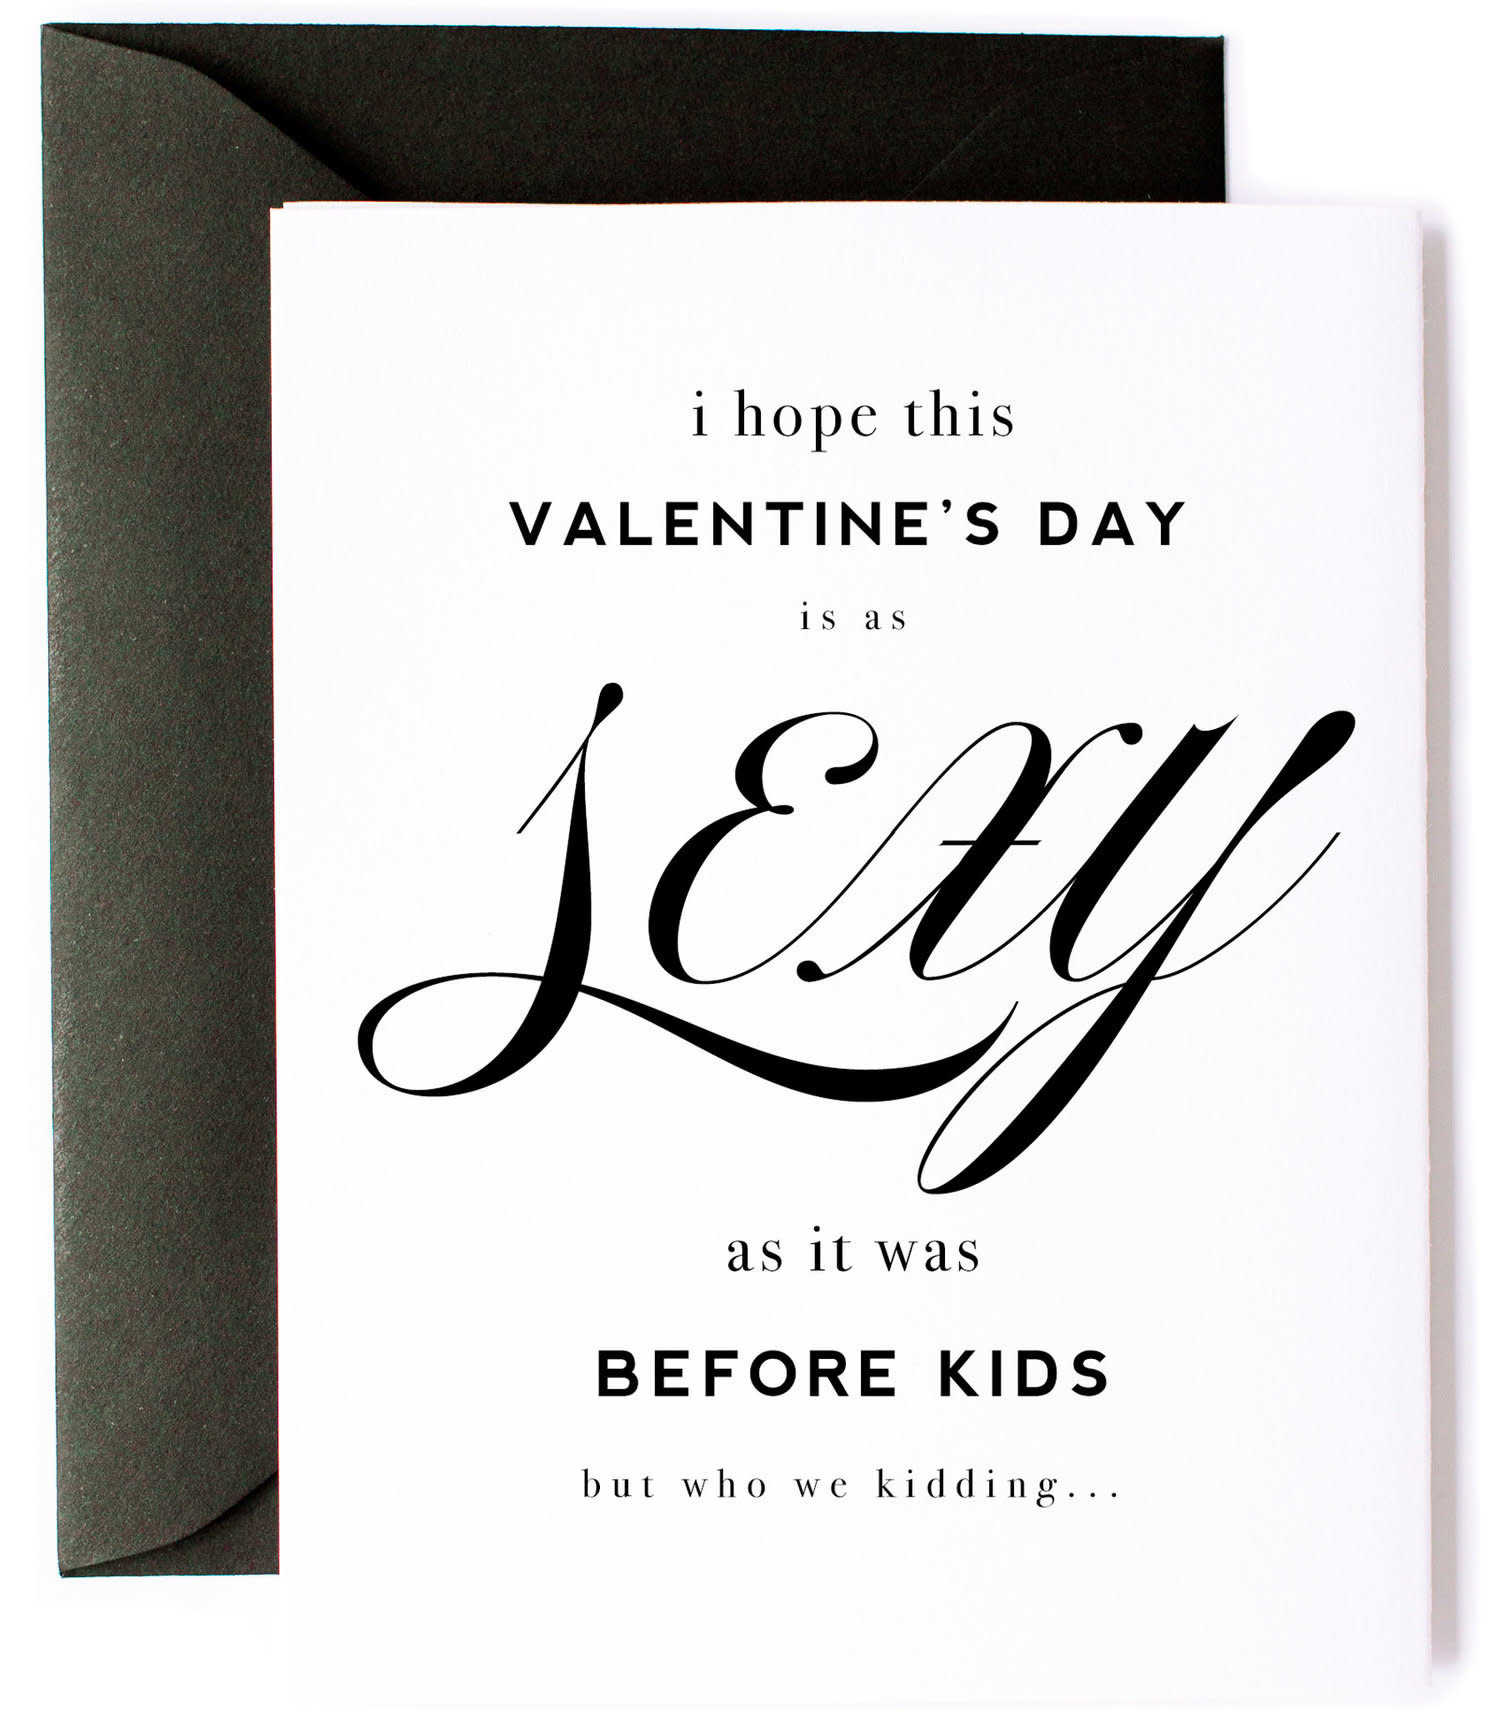 KITTY MEOW V-DAY SEXY BEFORE KIDS CARD